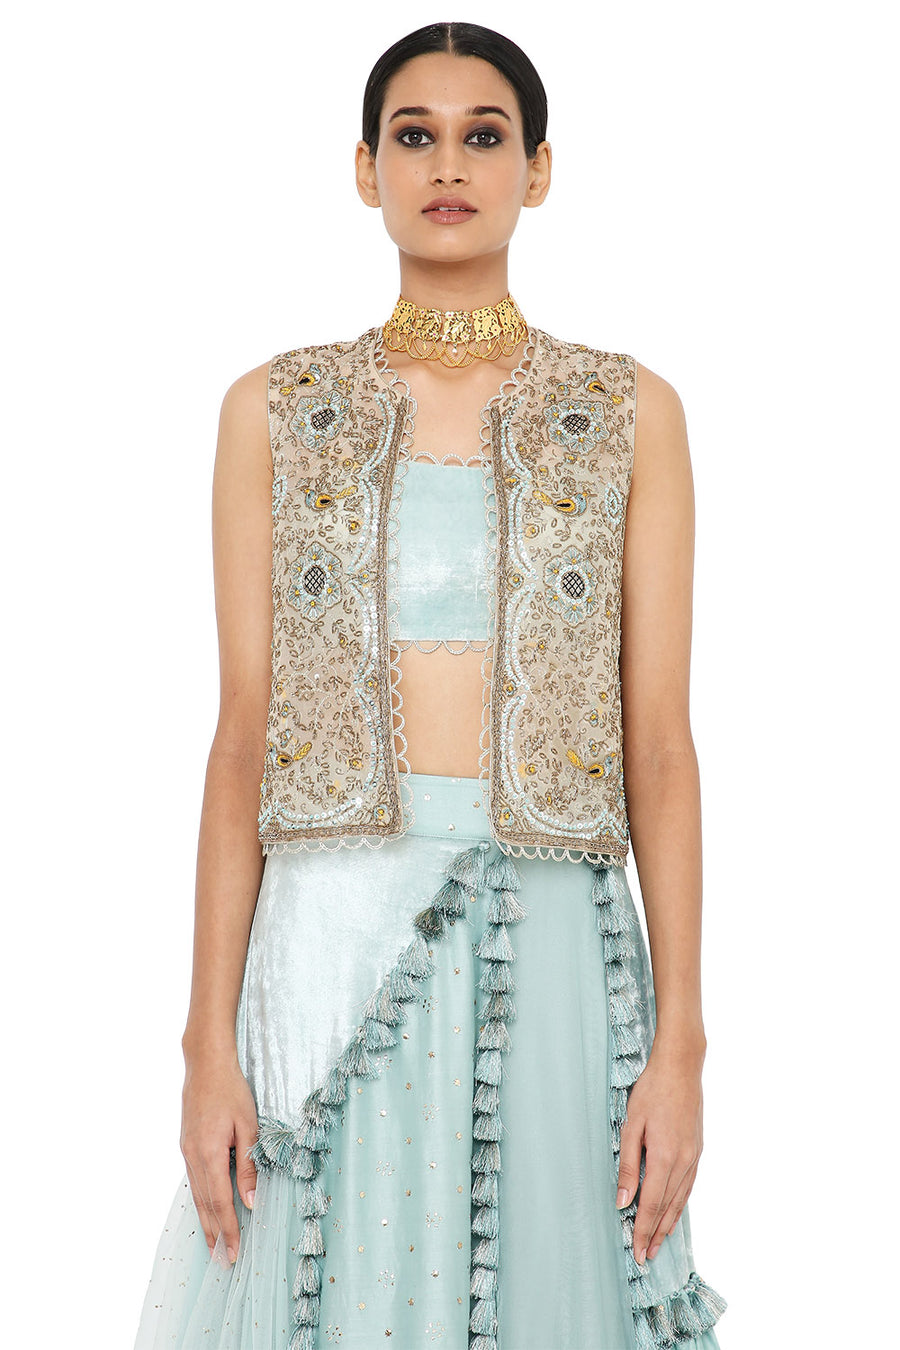 Payal Singhal  Stone Jacket And Bustier With Denim Sharara –  LIVEtheCOLLECTIVE